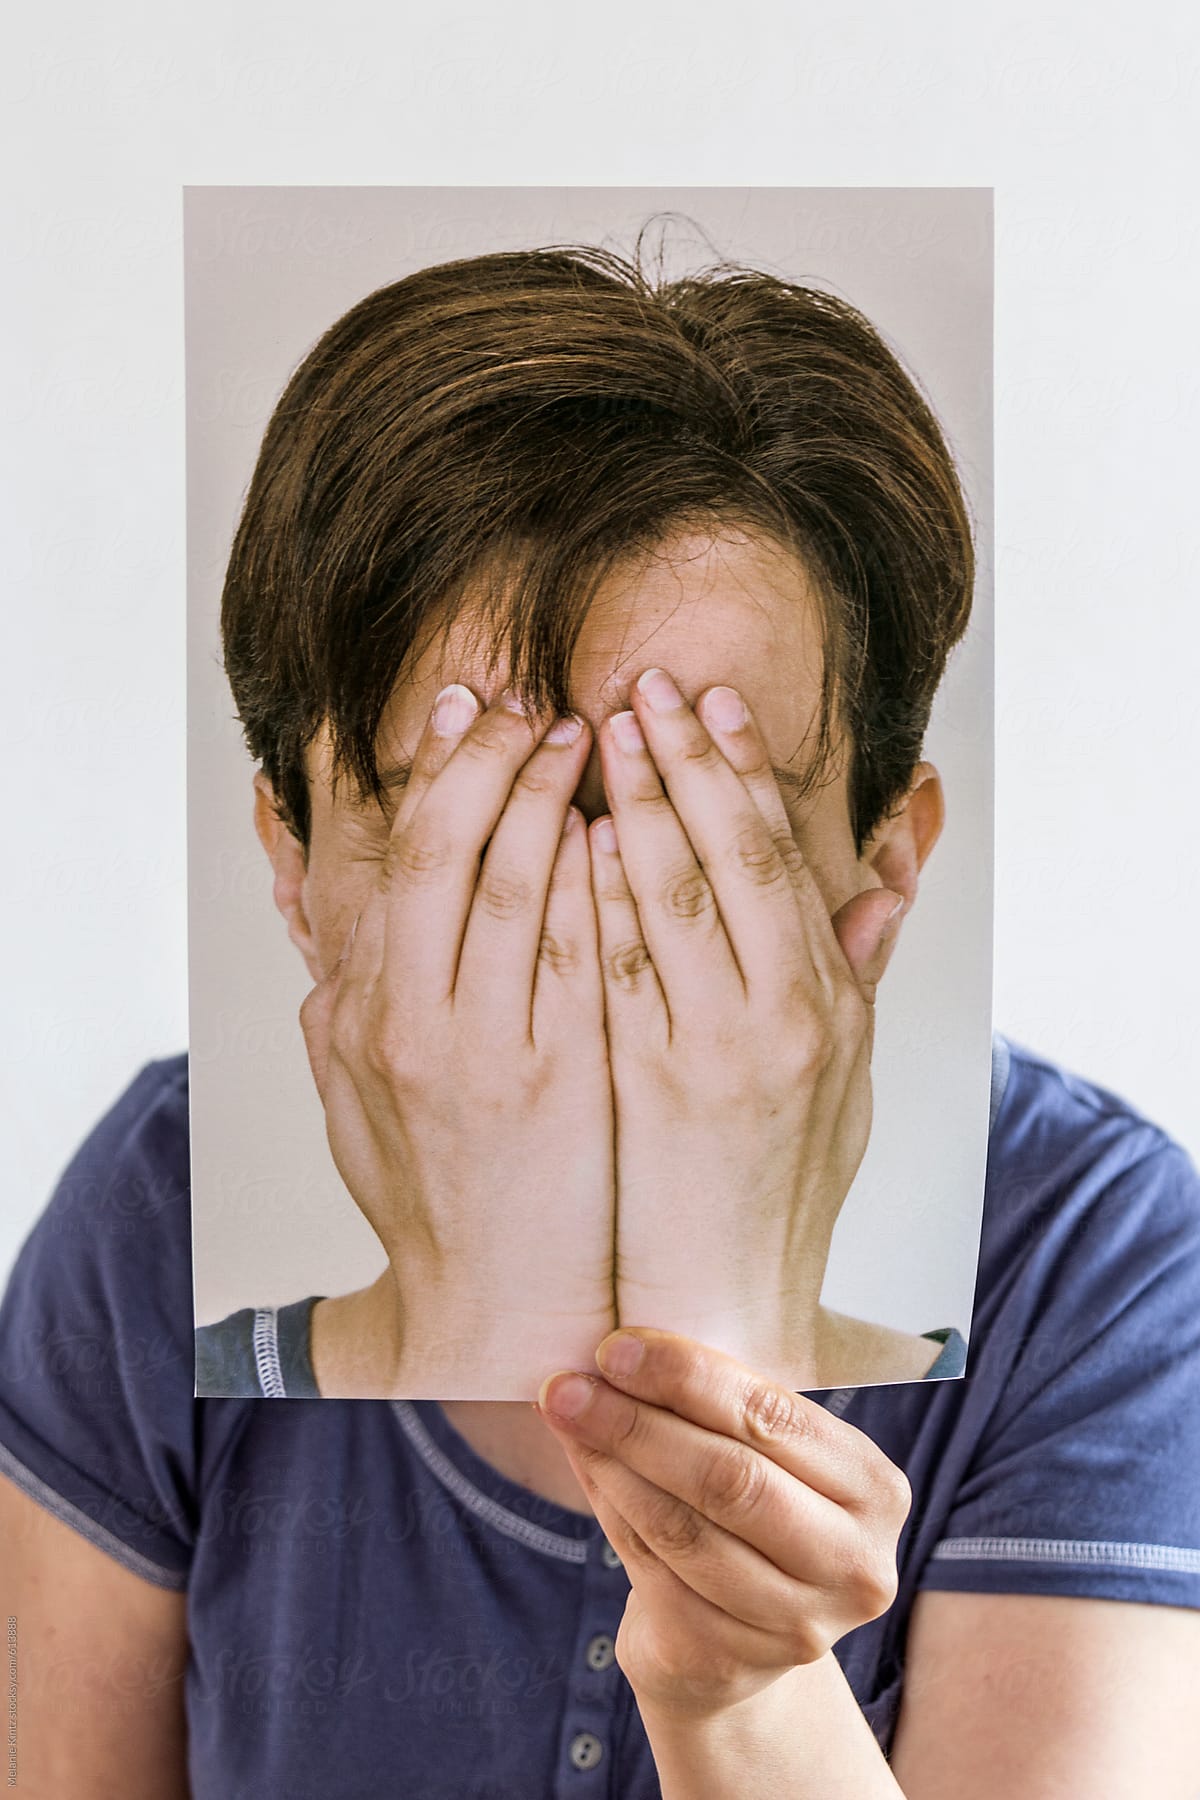 person hiding behind an image of her hiding behind her hands